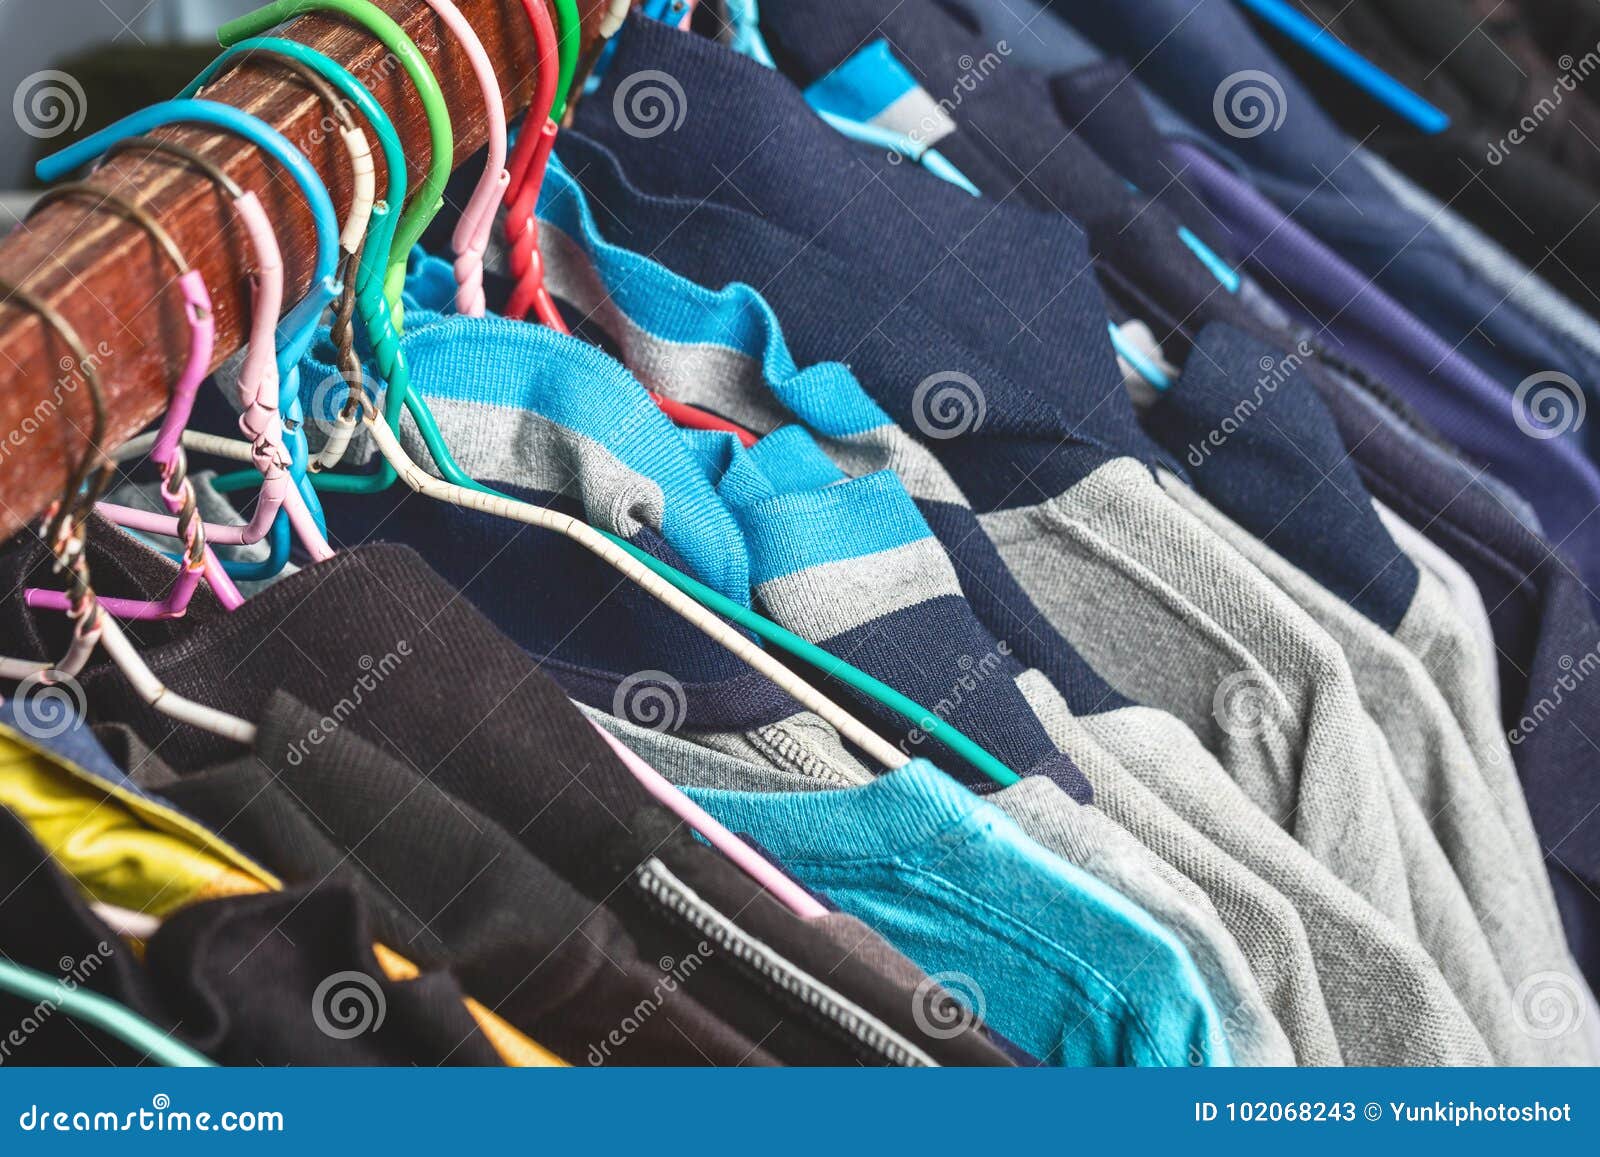 Clothes Hangers Hung by Clothes Stock Image - Image of market, clothing ...